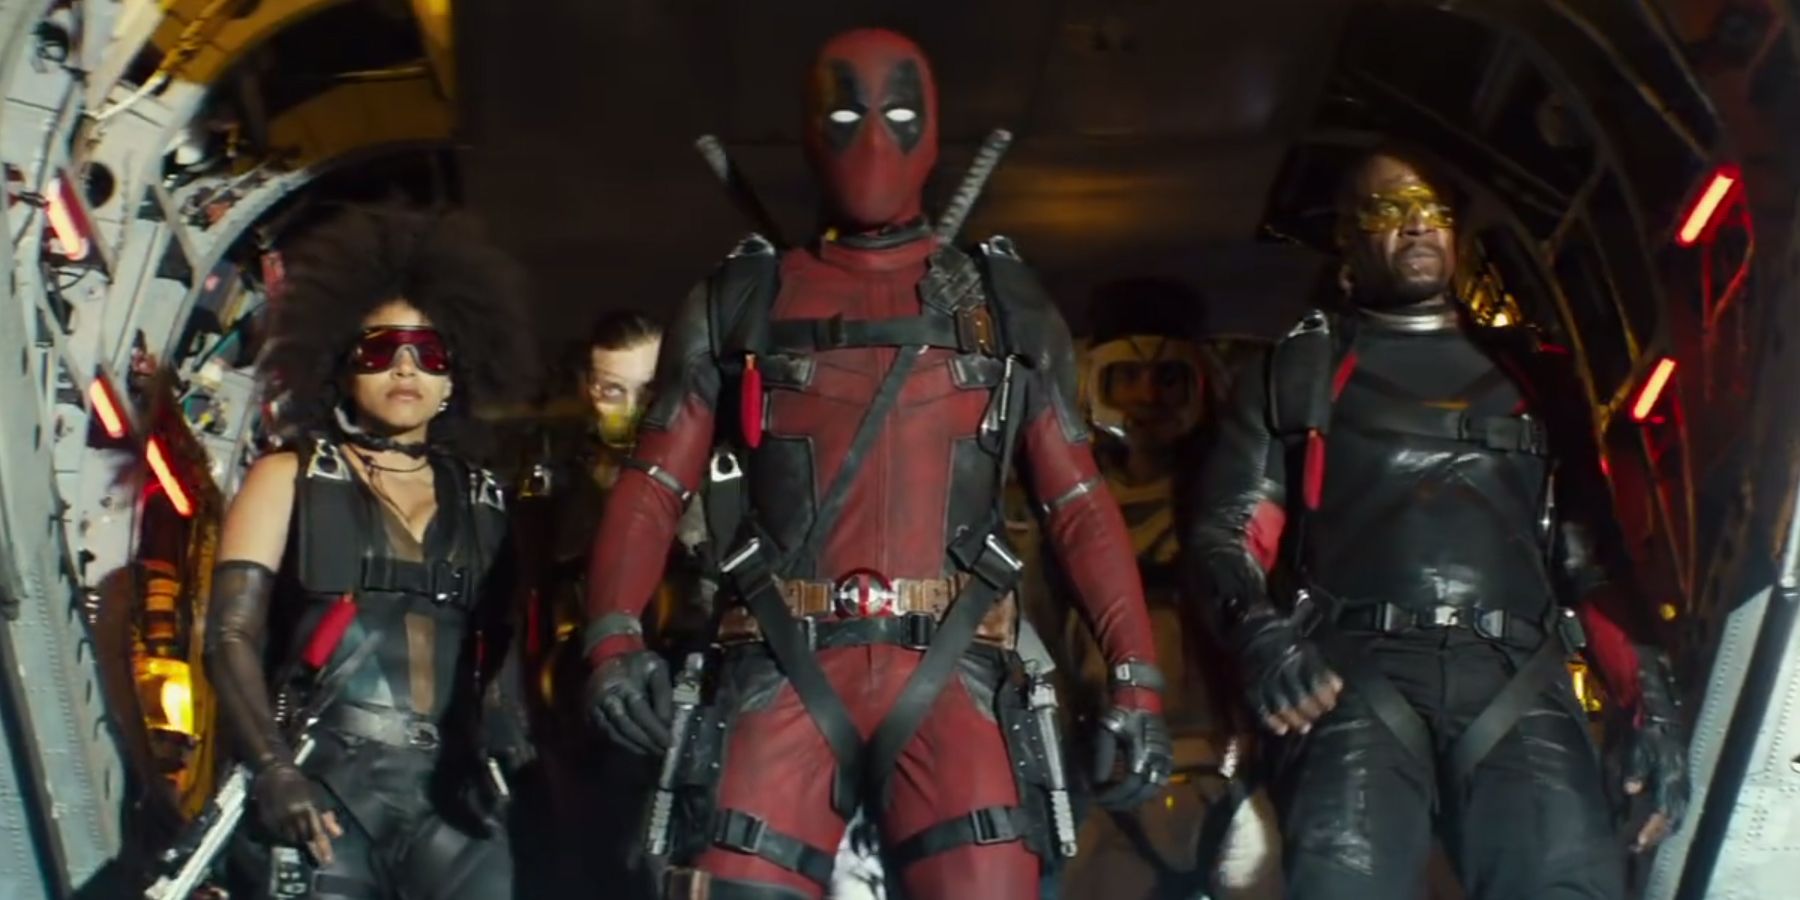 X-Force prepares to parachute in Deadpool 2.